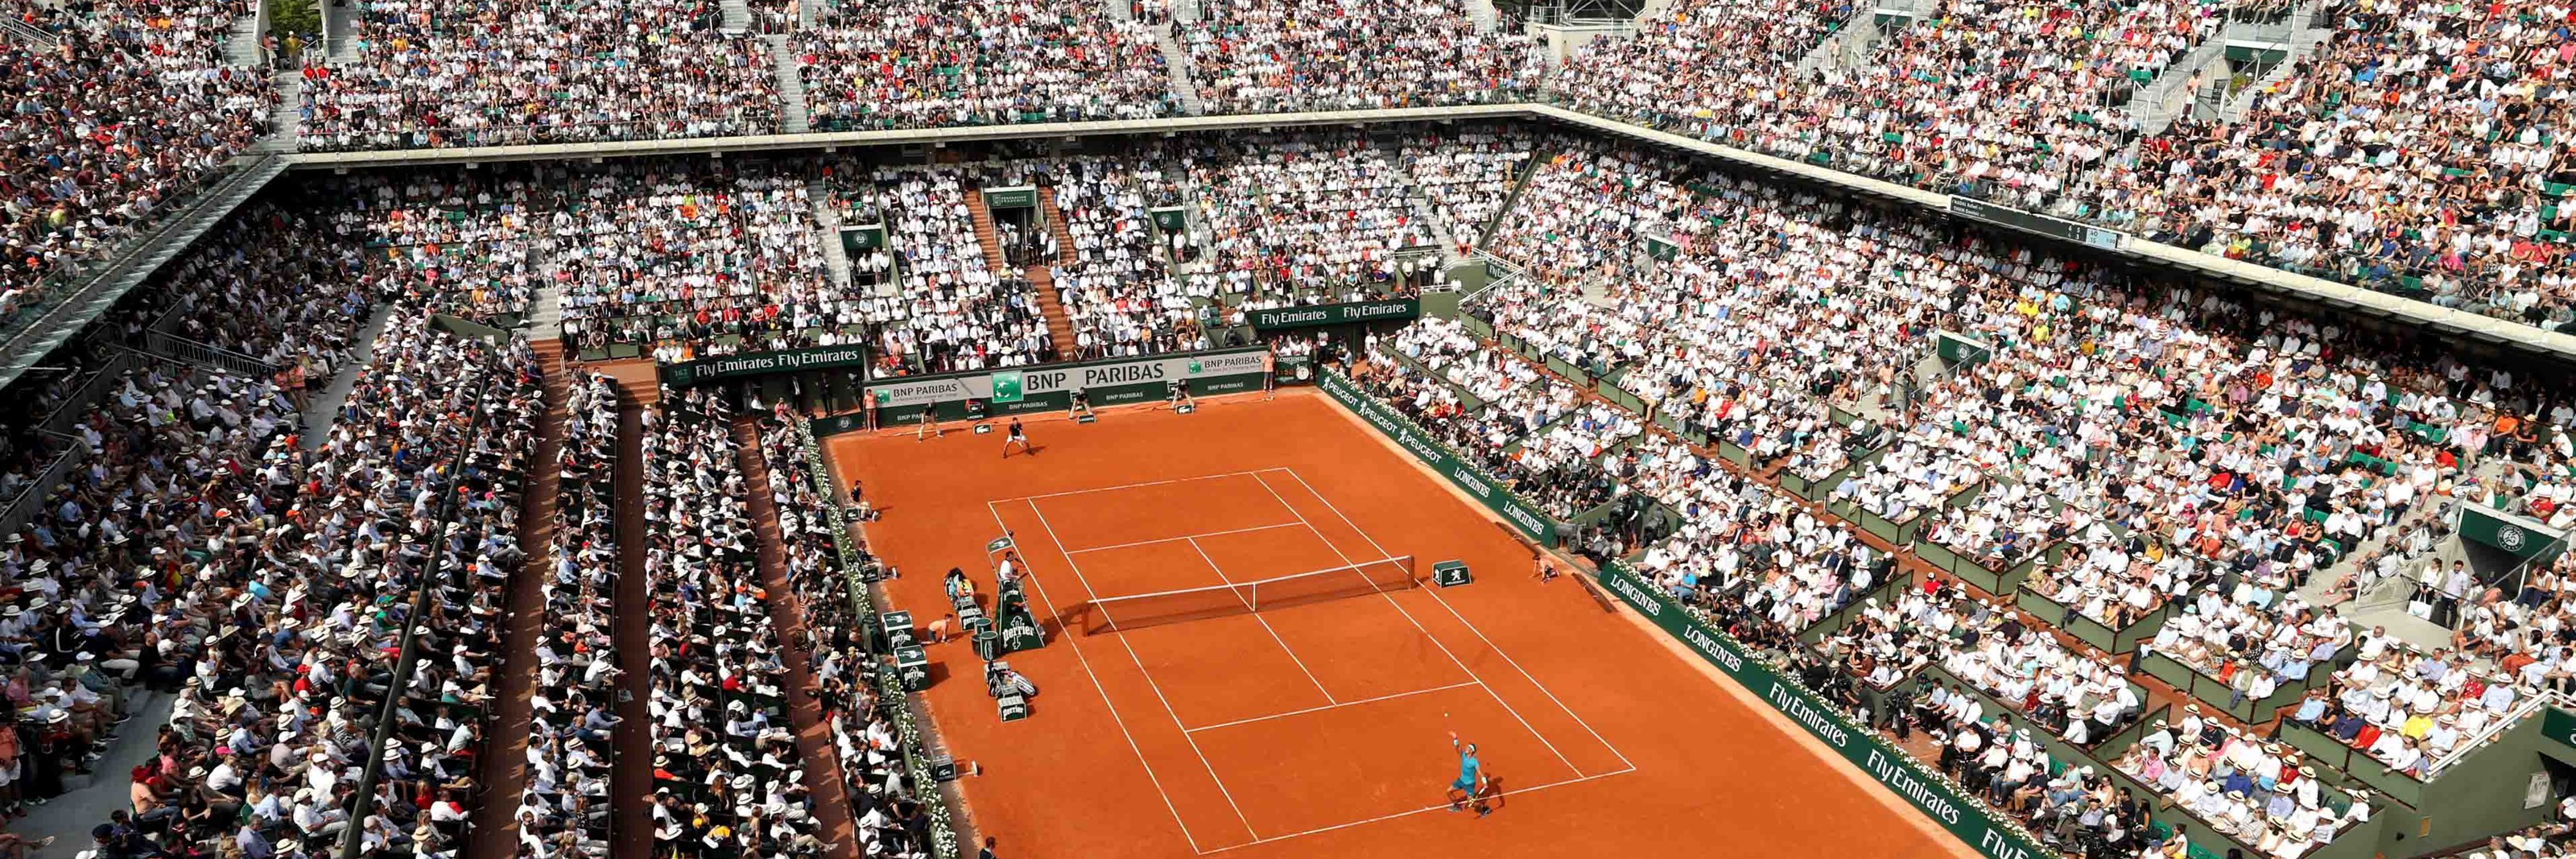 Clay court match with a stadium full of audience